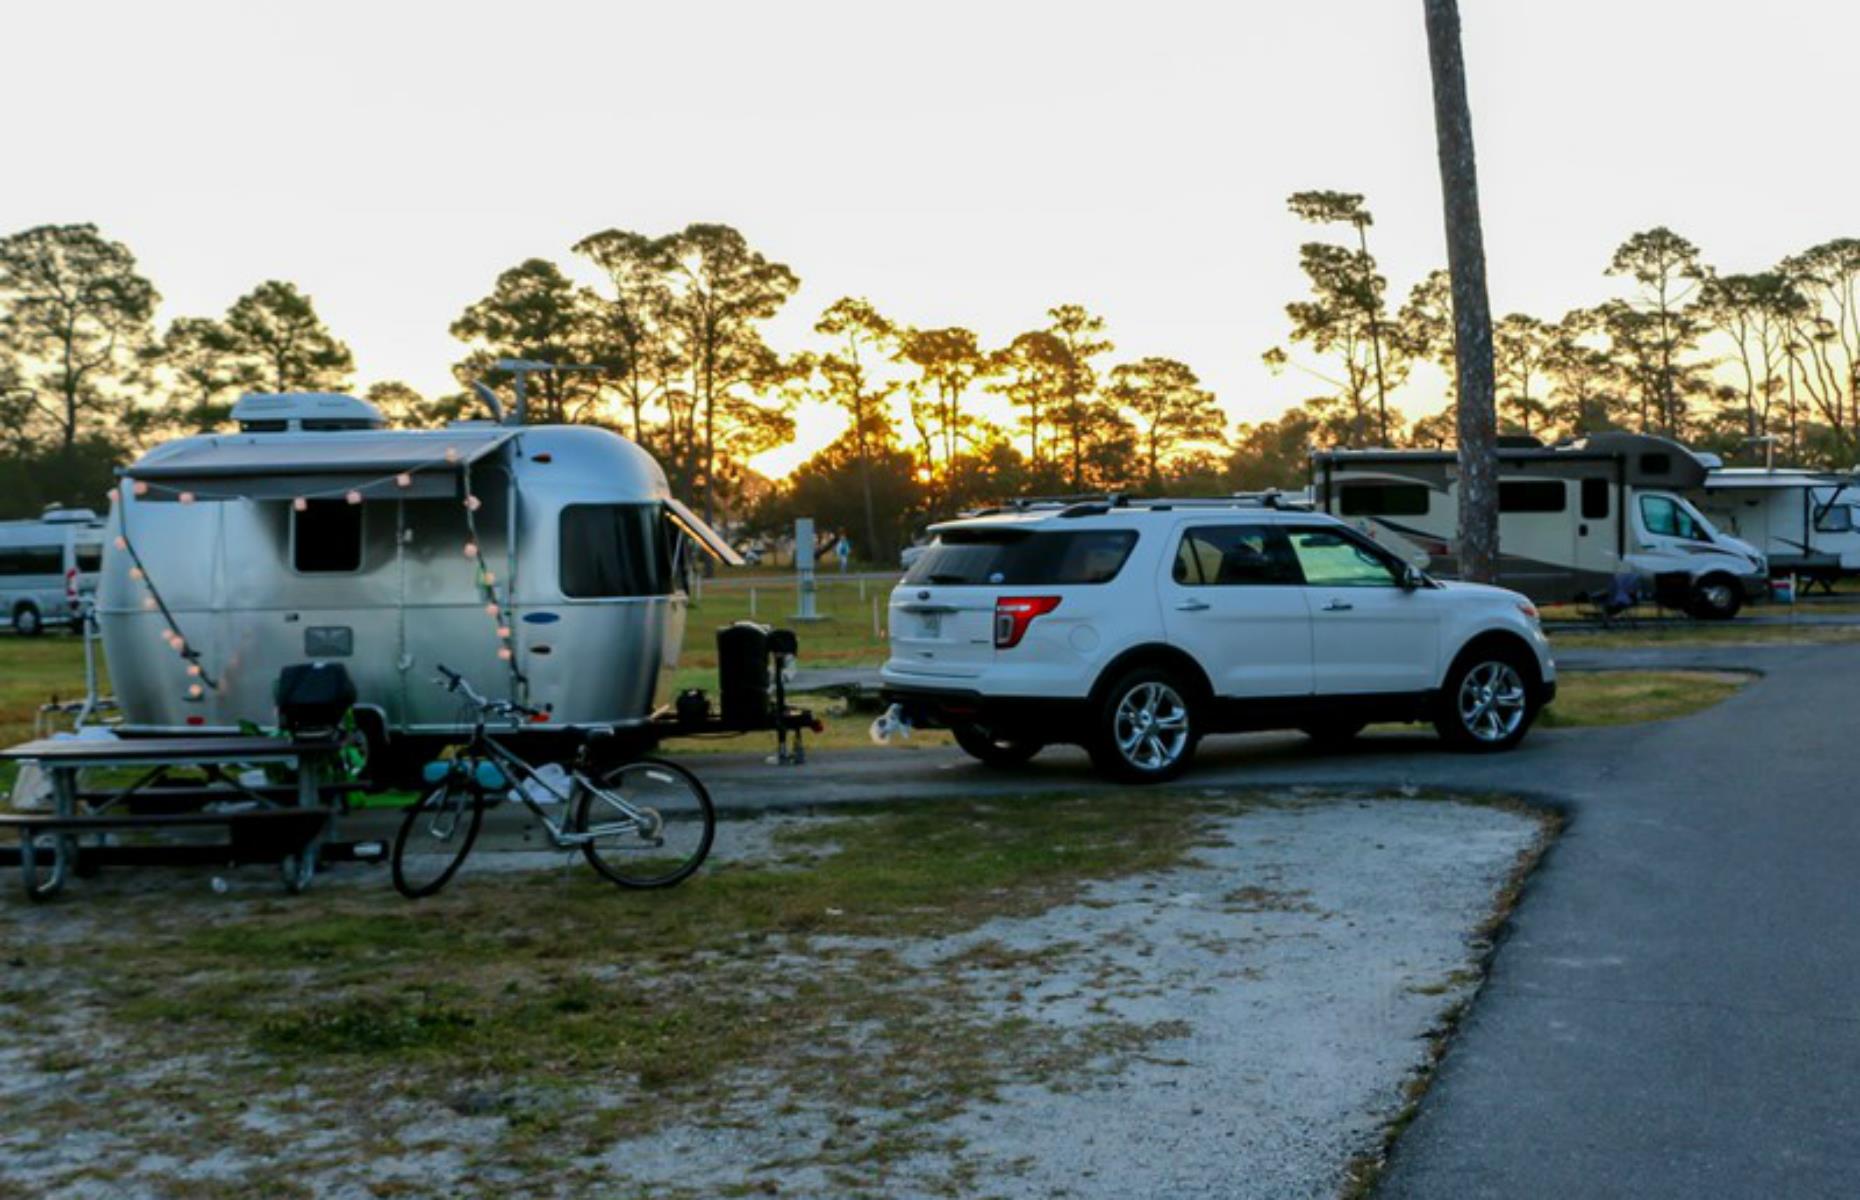 <p>This skinny spit of blazingly white sand, dissected by a road, straddles Mississippi and Florida. Each state has a <a href="https://www.nps.gov/guis/planyourvisit/campgrounds.htm">campground with RV sites</a> surrounded by sand, scrub oaks and the sparkling waters of the Gulf of Mexico. There are also day-use parking areas, from where it’s possible to pad down to the water’s edge for a picnic. Imposing former military facility Fort Pickens looms on the Florida side of the park, in Pensacola Bay. The campgrounds are currently closed due to COVID-19 – the <a href="https://www.nps.gov/guis/planyourvisit/campgrounds.htm">park website</a> has updates.</p>